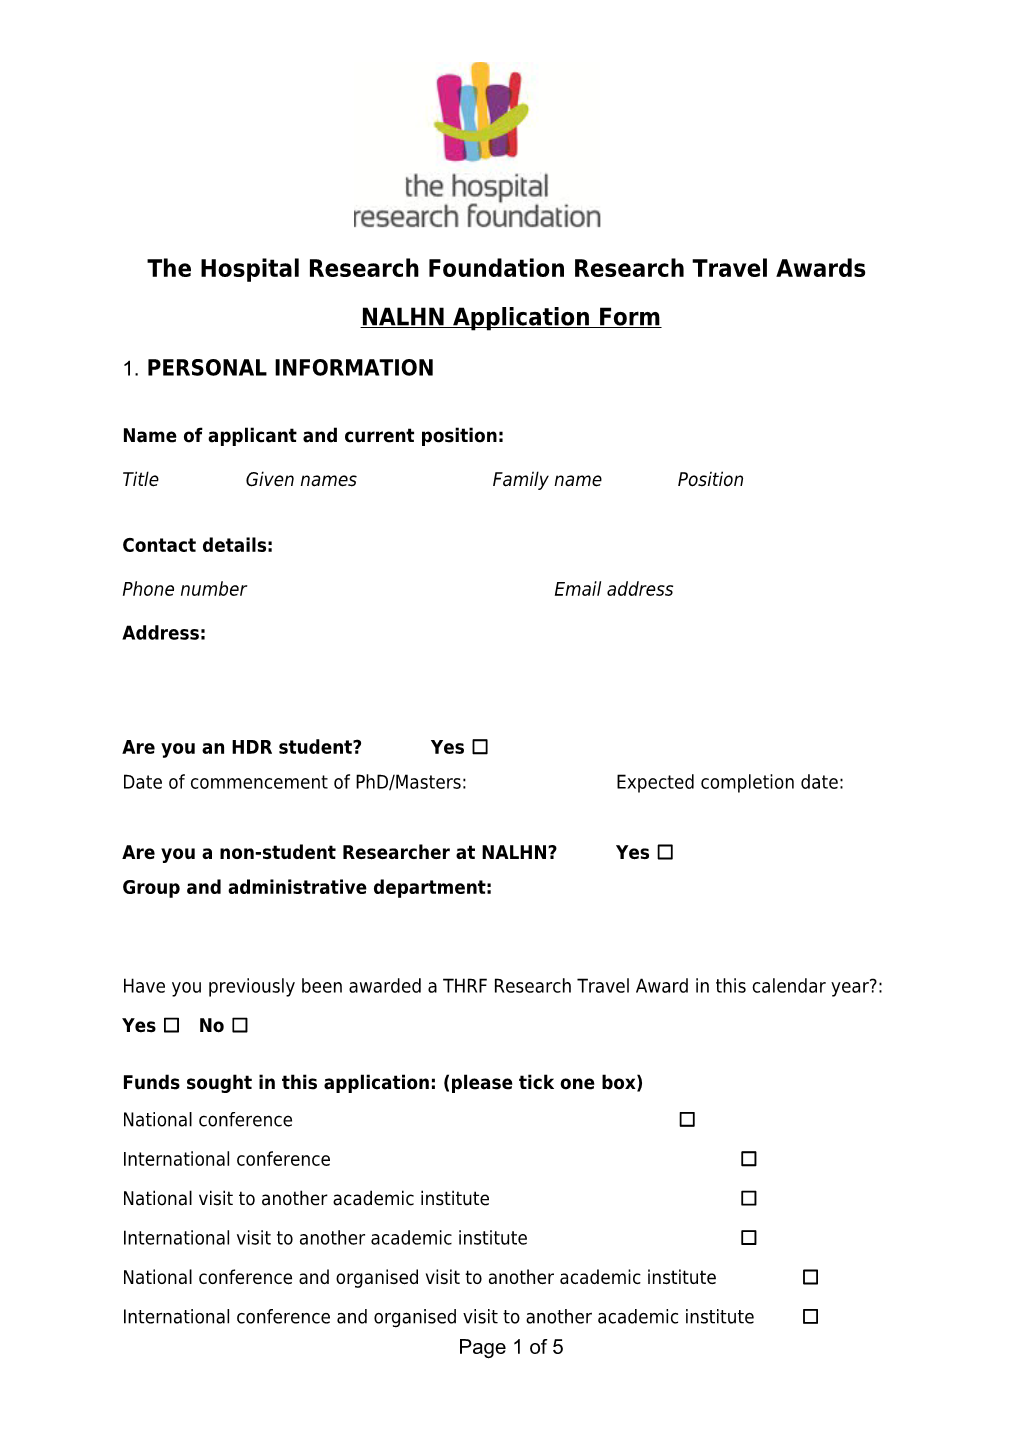 The Hospital Research Foundation Research Travel Awards